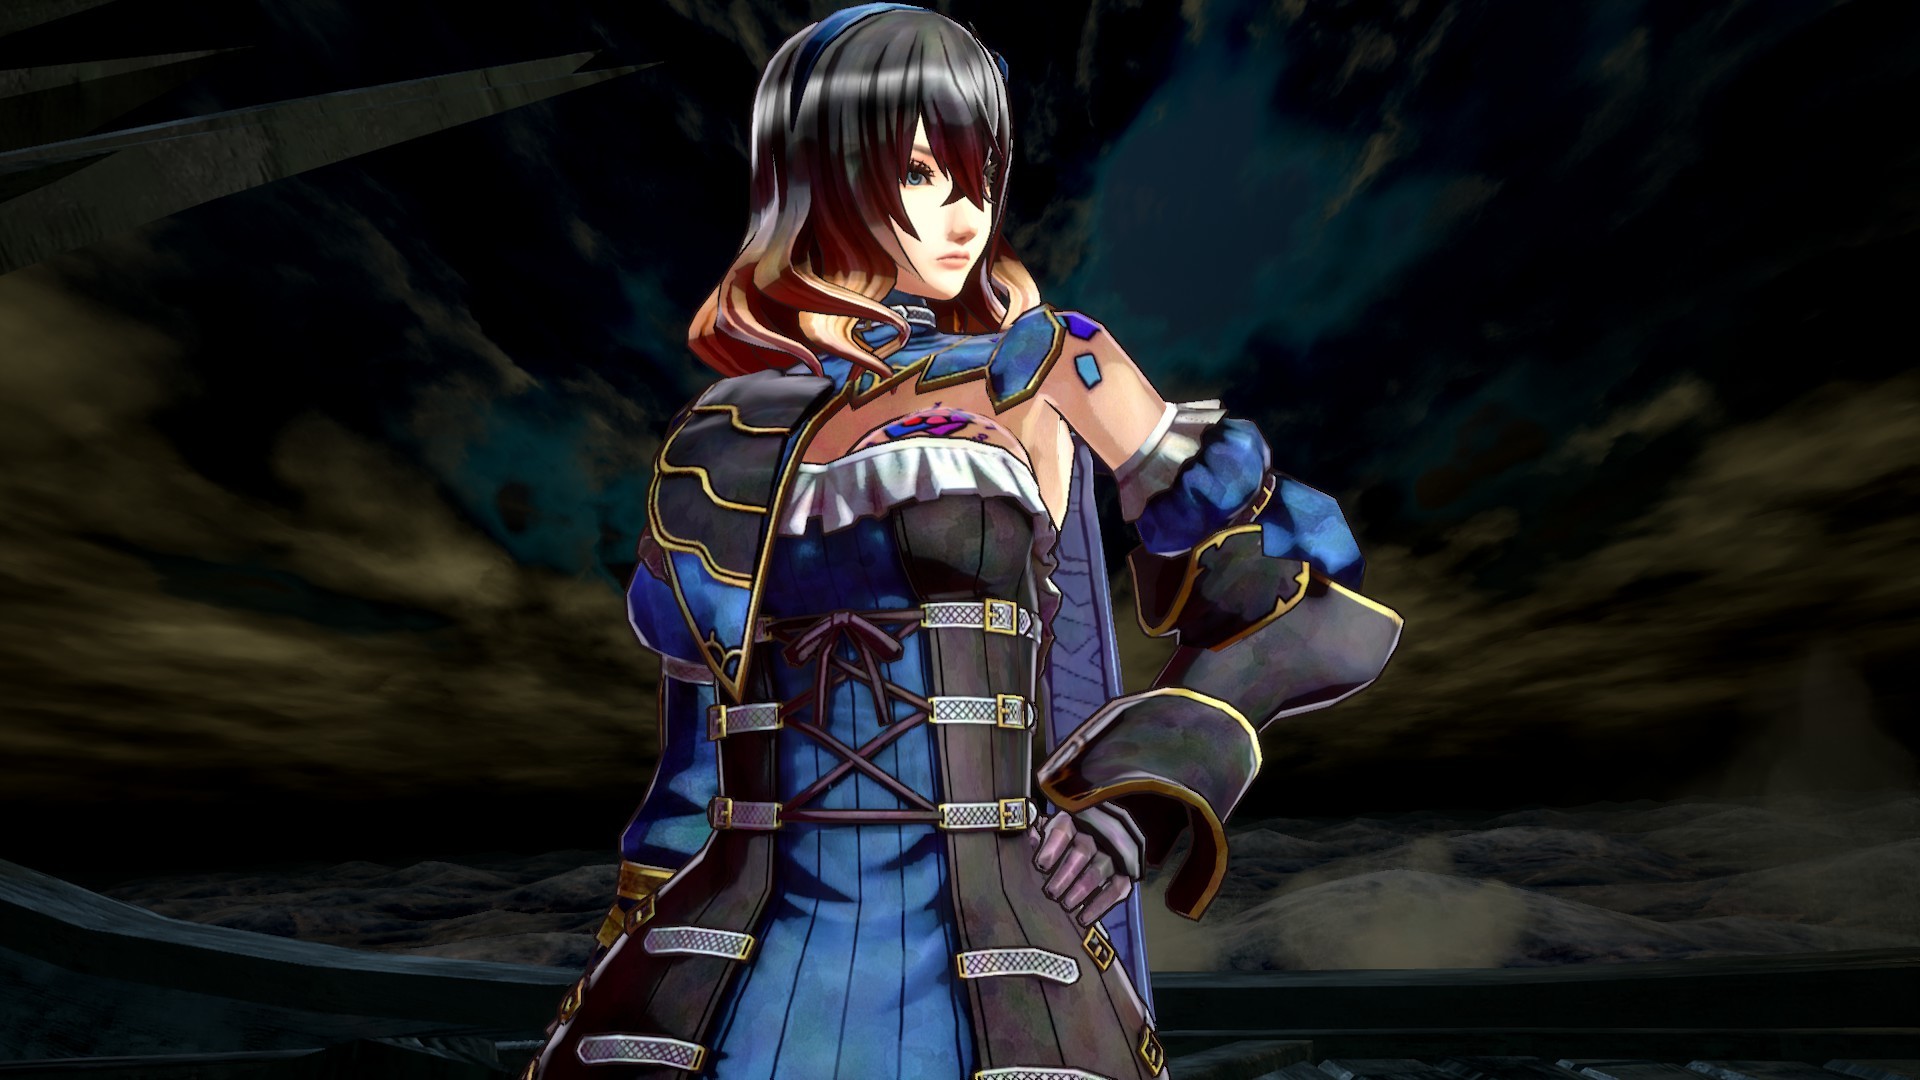 Bloodstained: Ritual of the Night - Soundtrack Featured Screenshot #1